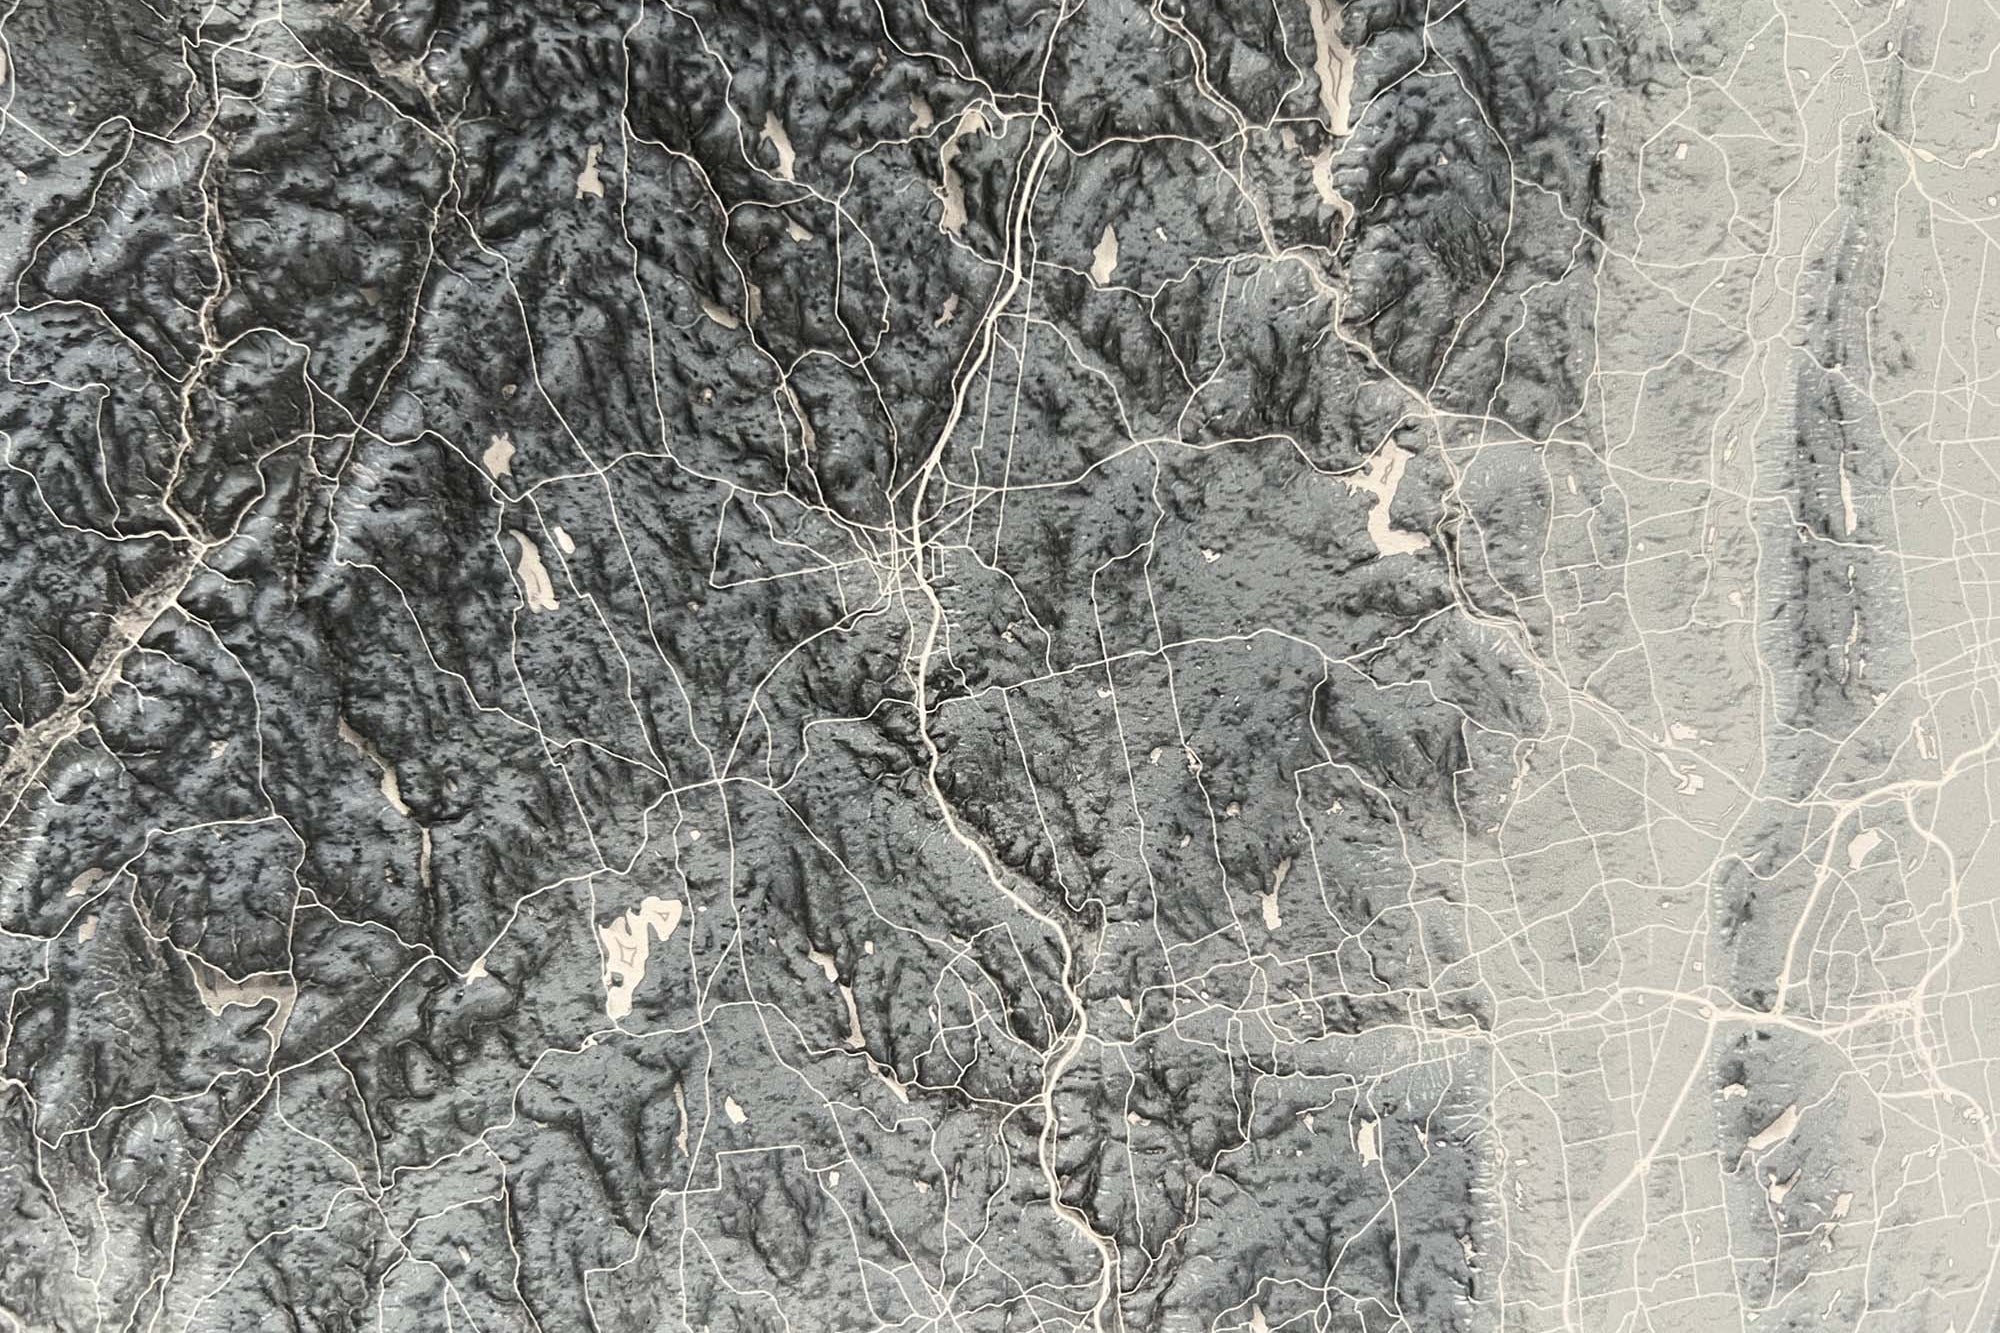 detailed Connecticut River Valley Map